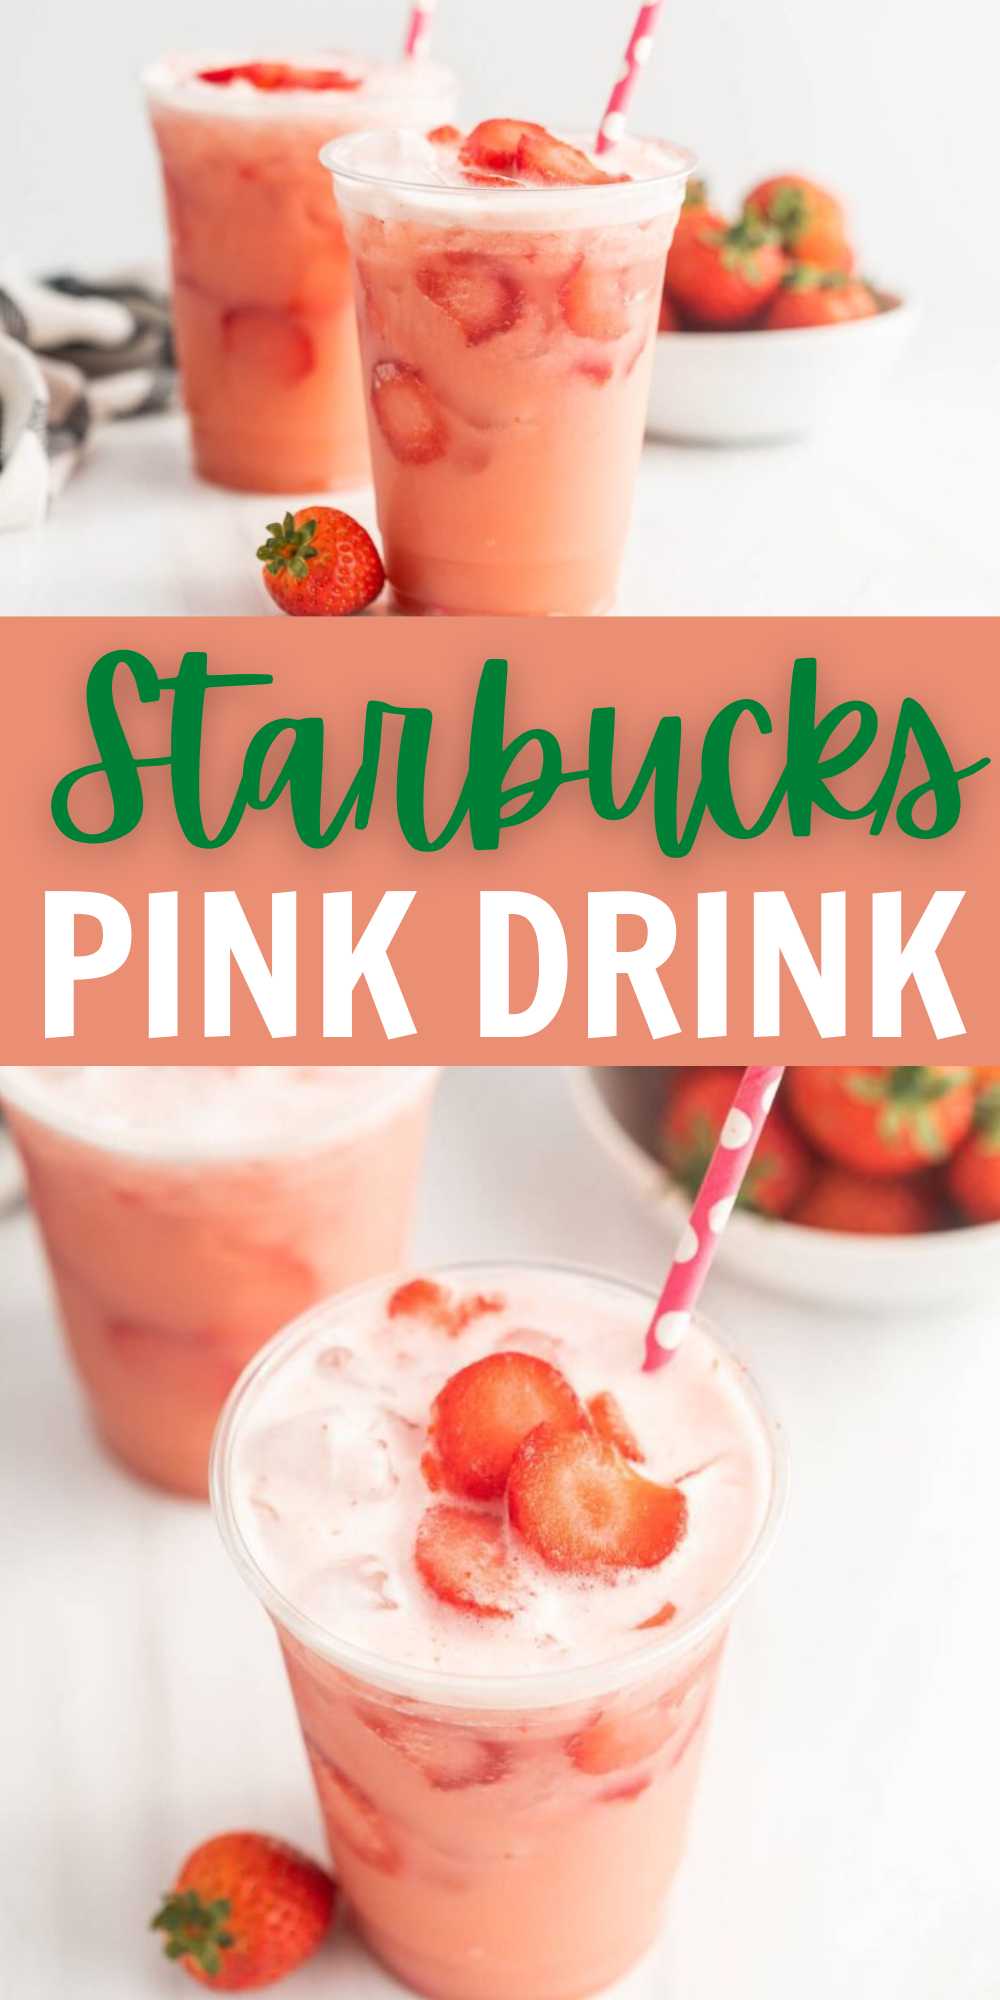 Starbucks Pink Drink can easily be made at home with 5 simple ingredients. Make your favorite drink at home to save time and money. It is creamy, delicious and so refreshing and now I can make it at home. There is nothing fancy about the ingredients, just 5 simple ingredients. #eatingonadime #starbuckspinkdrink #pinkdrink